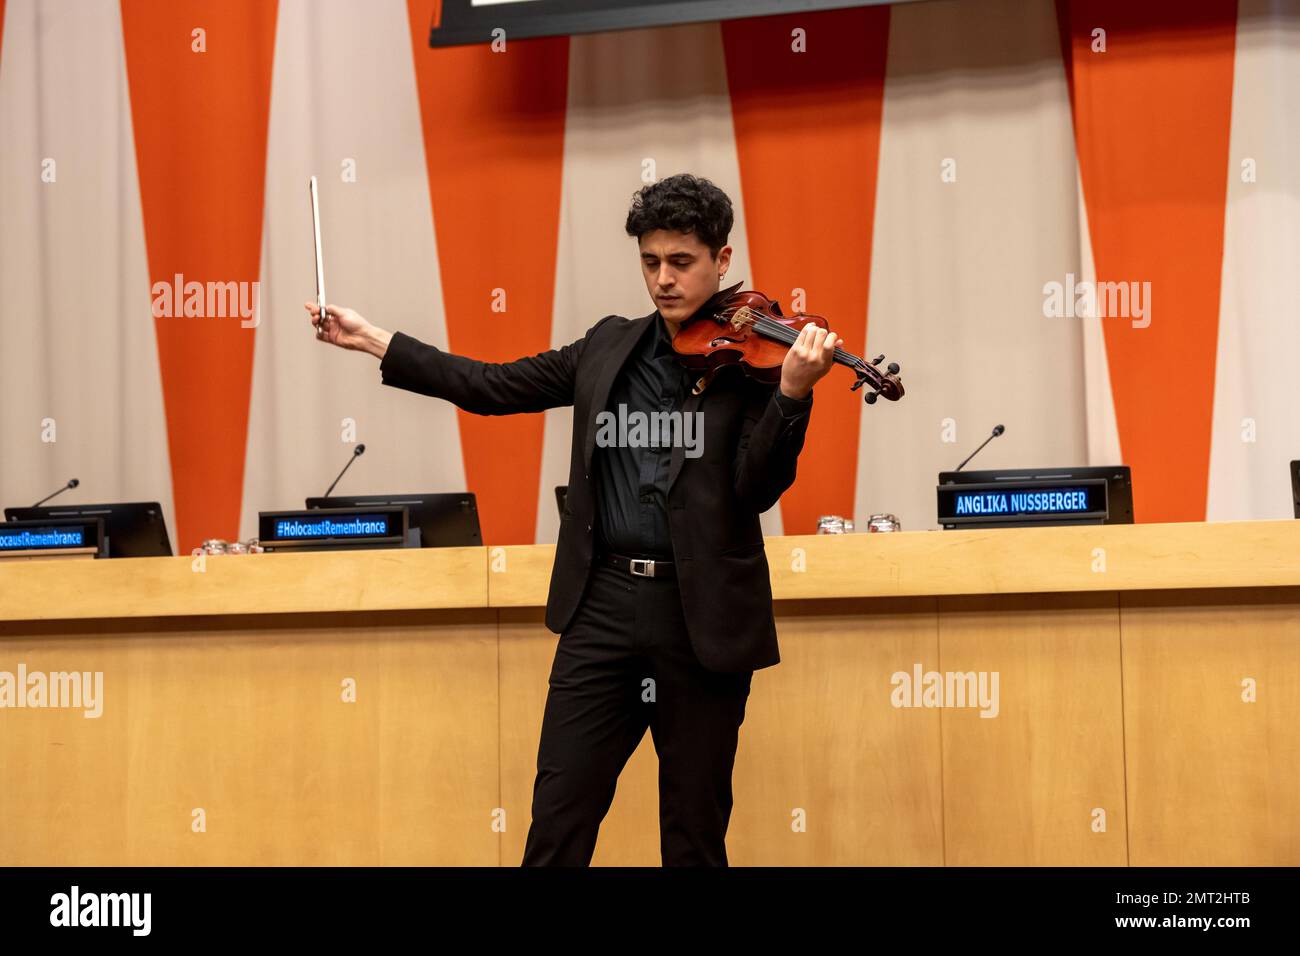 NEW YORK, NEW YORK - JANUARY 31: Brian Urra plays the violin at a special event 'International Mock Trial on Human Rights' on the occasion of the International Day of Commemoration in Memory of the Victims of the Holocaust (27 Jan) at the New York United Nations Headquarters on January 31, 2023 in New York City.    The participants, student from several countries, interrogate the actions and responsibilities of Ernst Rüdin, the so-called father of Nazi Racial Hygiene. Stock Photo